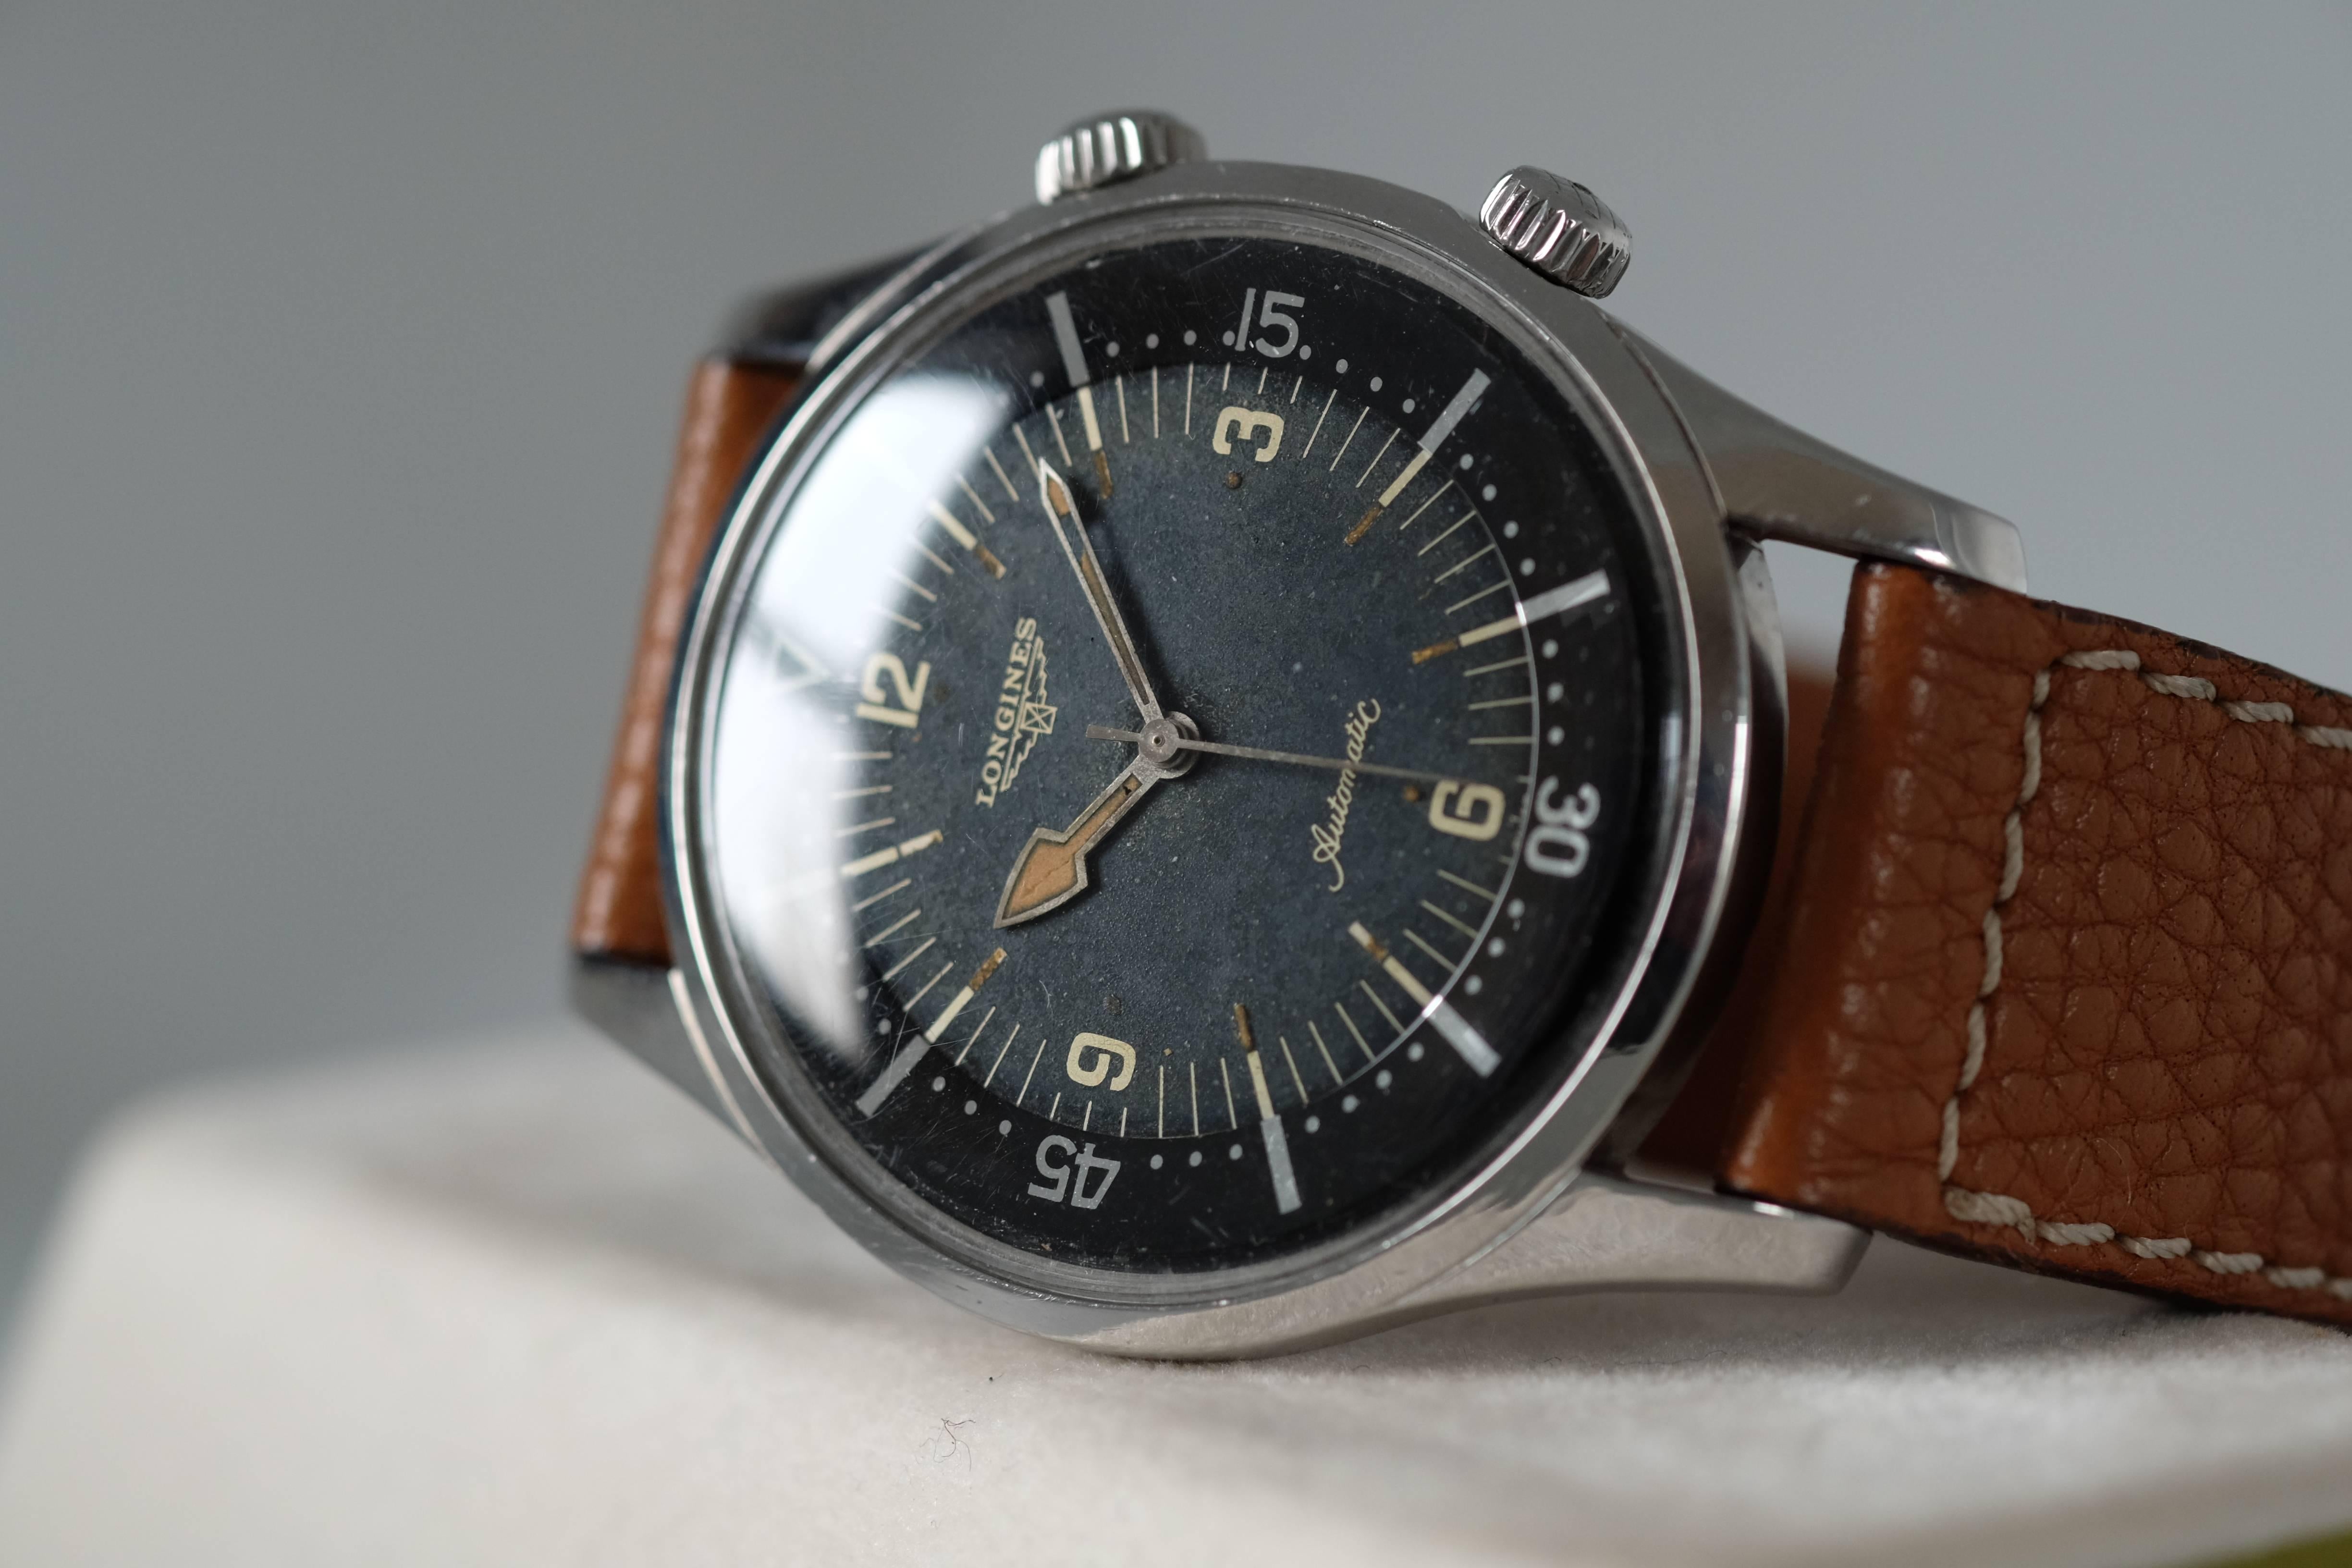 A Stainless Steel Dive Watch from Longines in a Super compressor Case ref 7042

Circa: 1950s 

Movement: 

Case: 40mm; stainless steel compressor case with screw-down case back and crowns

Dial: Black dial with luminous numerals, baton